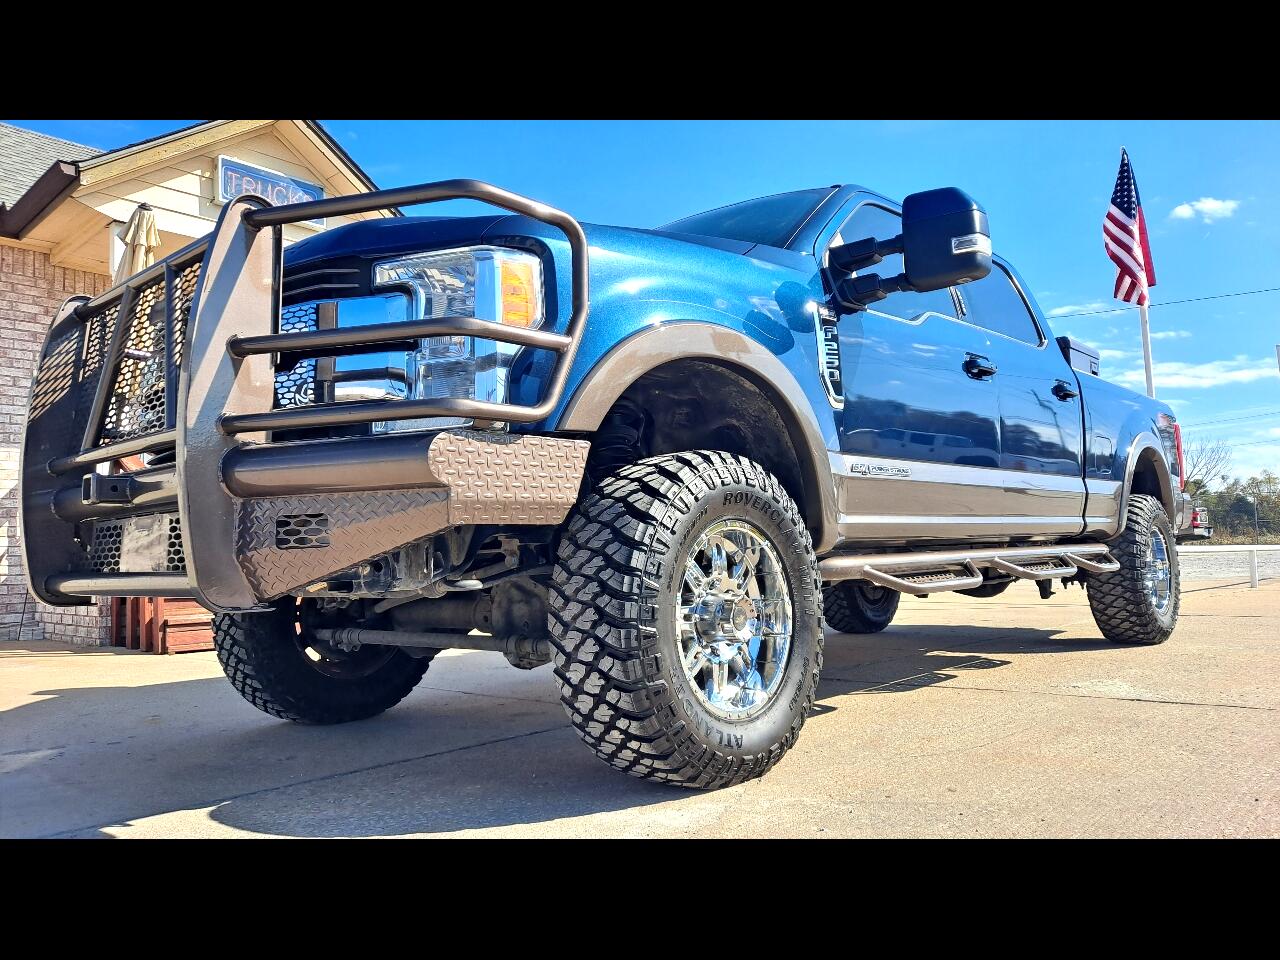 2017 Ford F-250 SD King Ranch Crew Cab 4WD